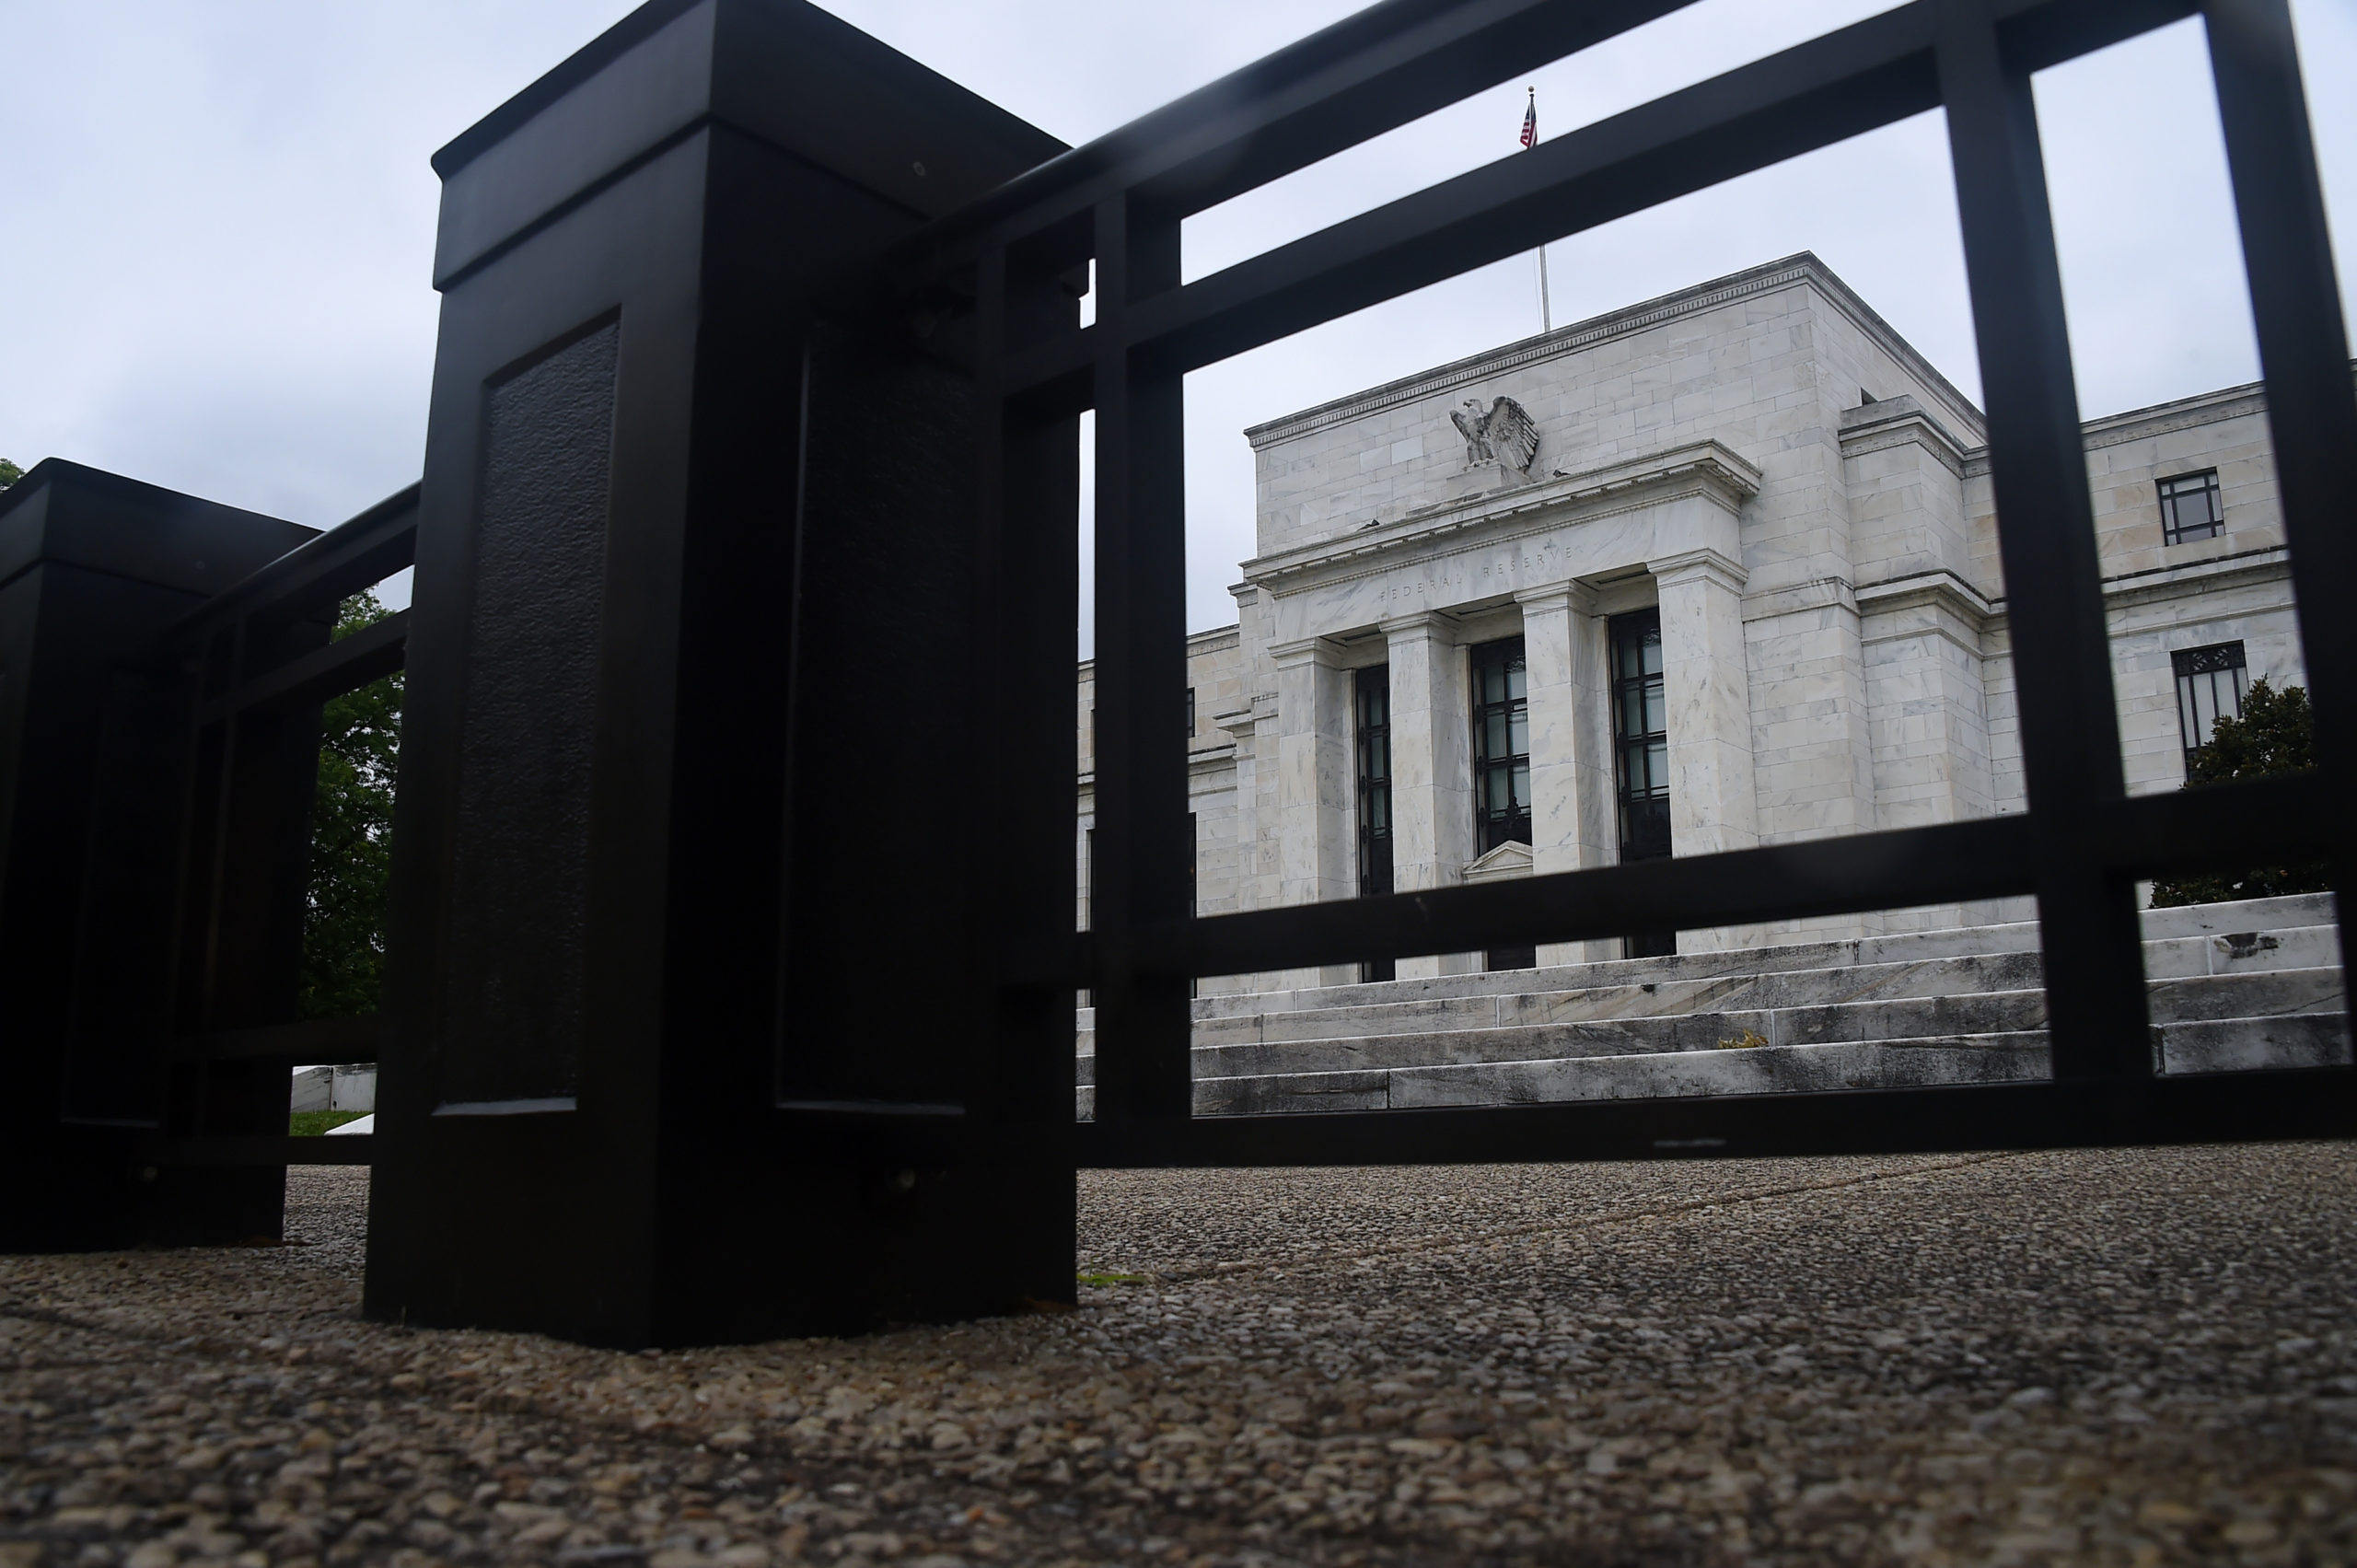 The Federal Reserve Building is seen through a fence on June 17, 2020 in Washington, DC. (Photo by Olivier DOULIERY / AFP) (Photo by OLIVIER DOULIERY/AFP via Getty Images)